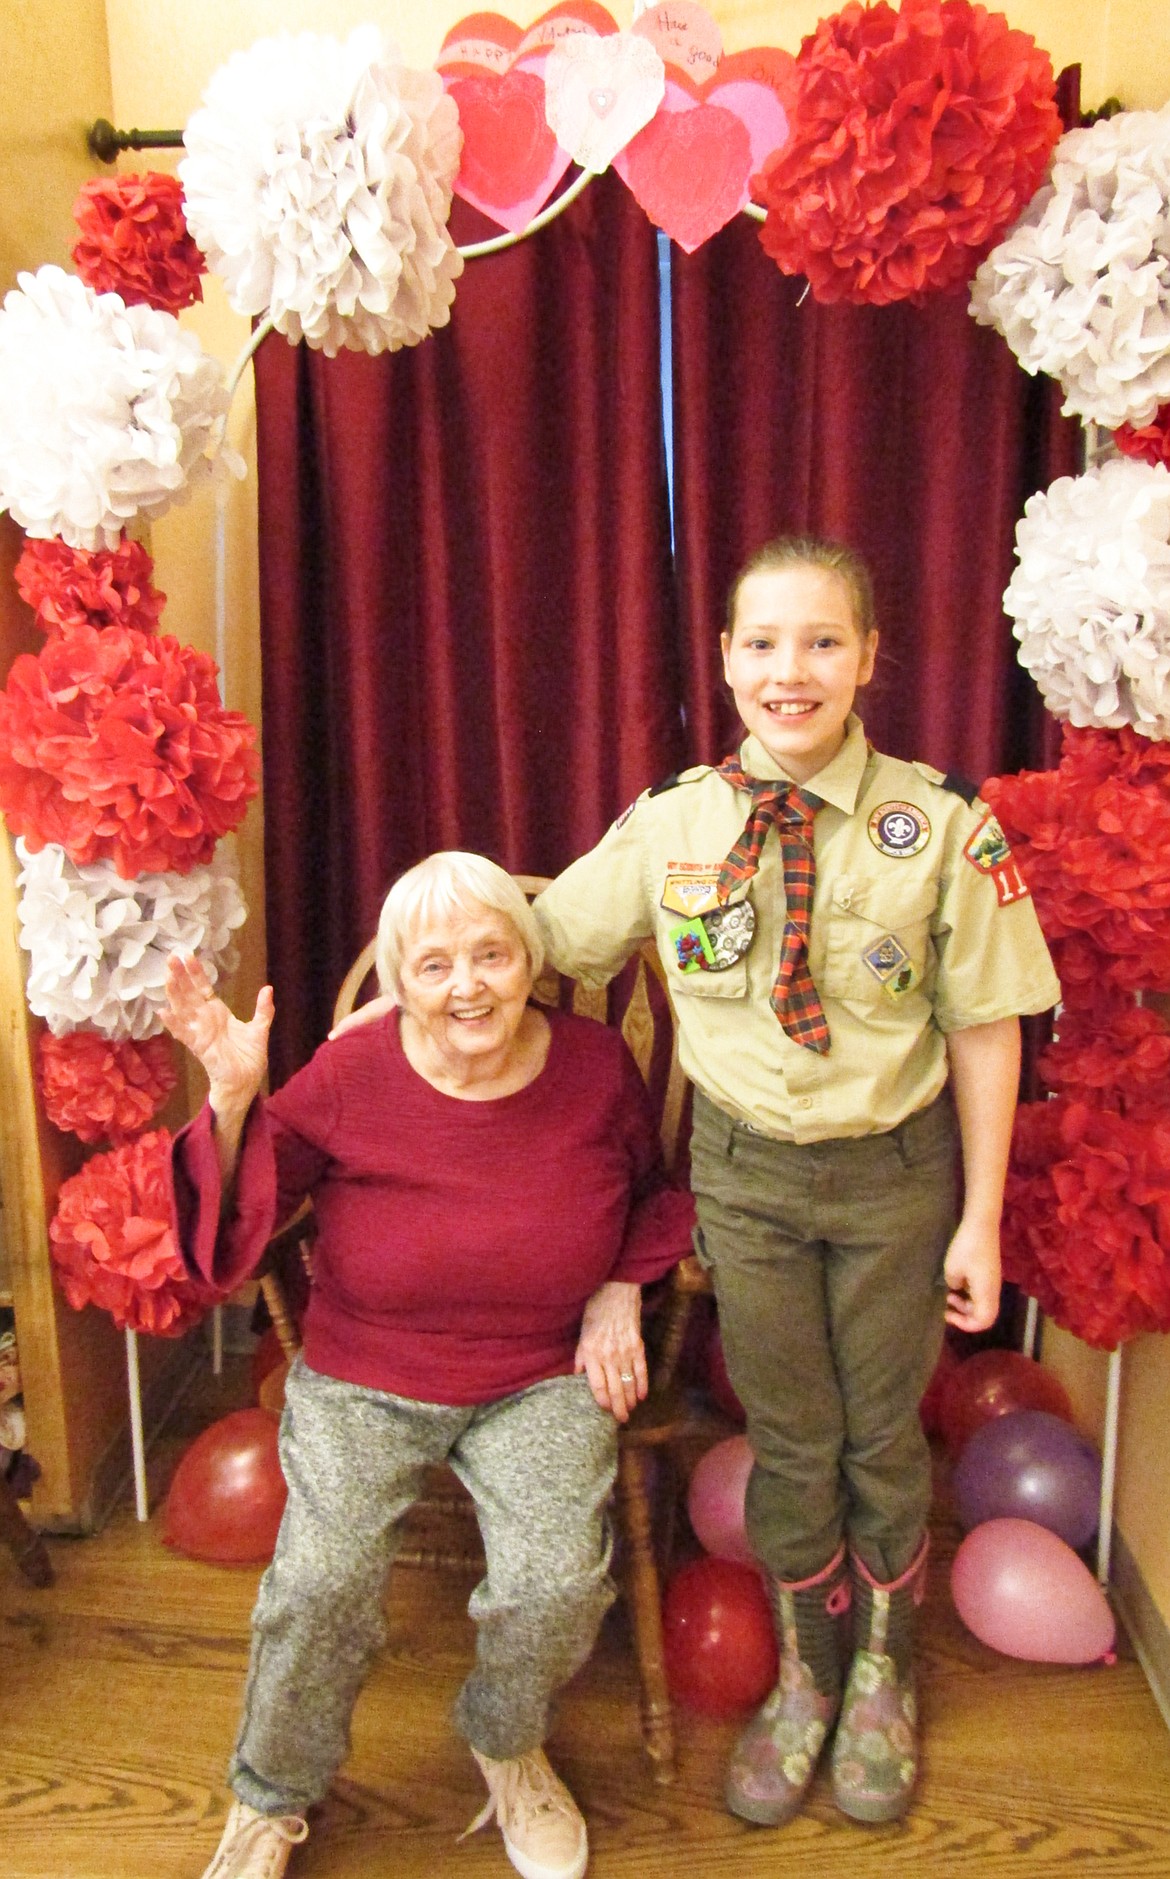 The restorium was brightly decorated for residents on Valentine’s Day.